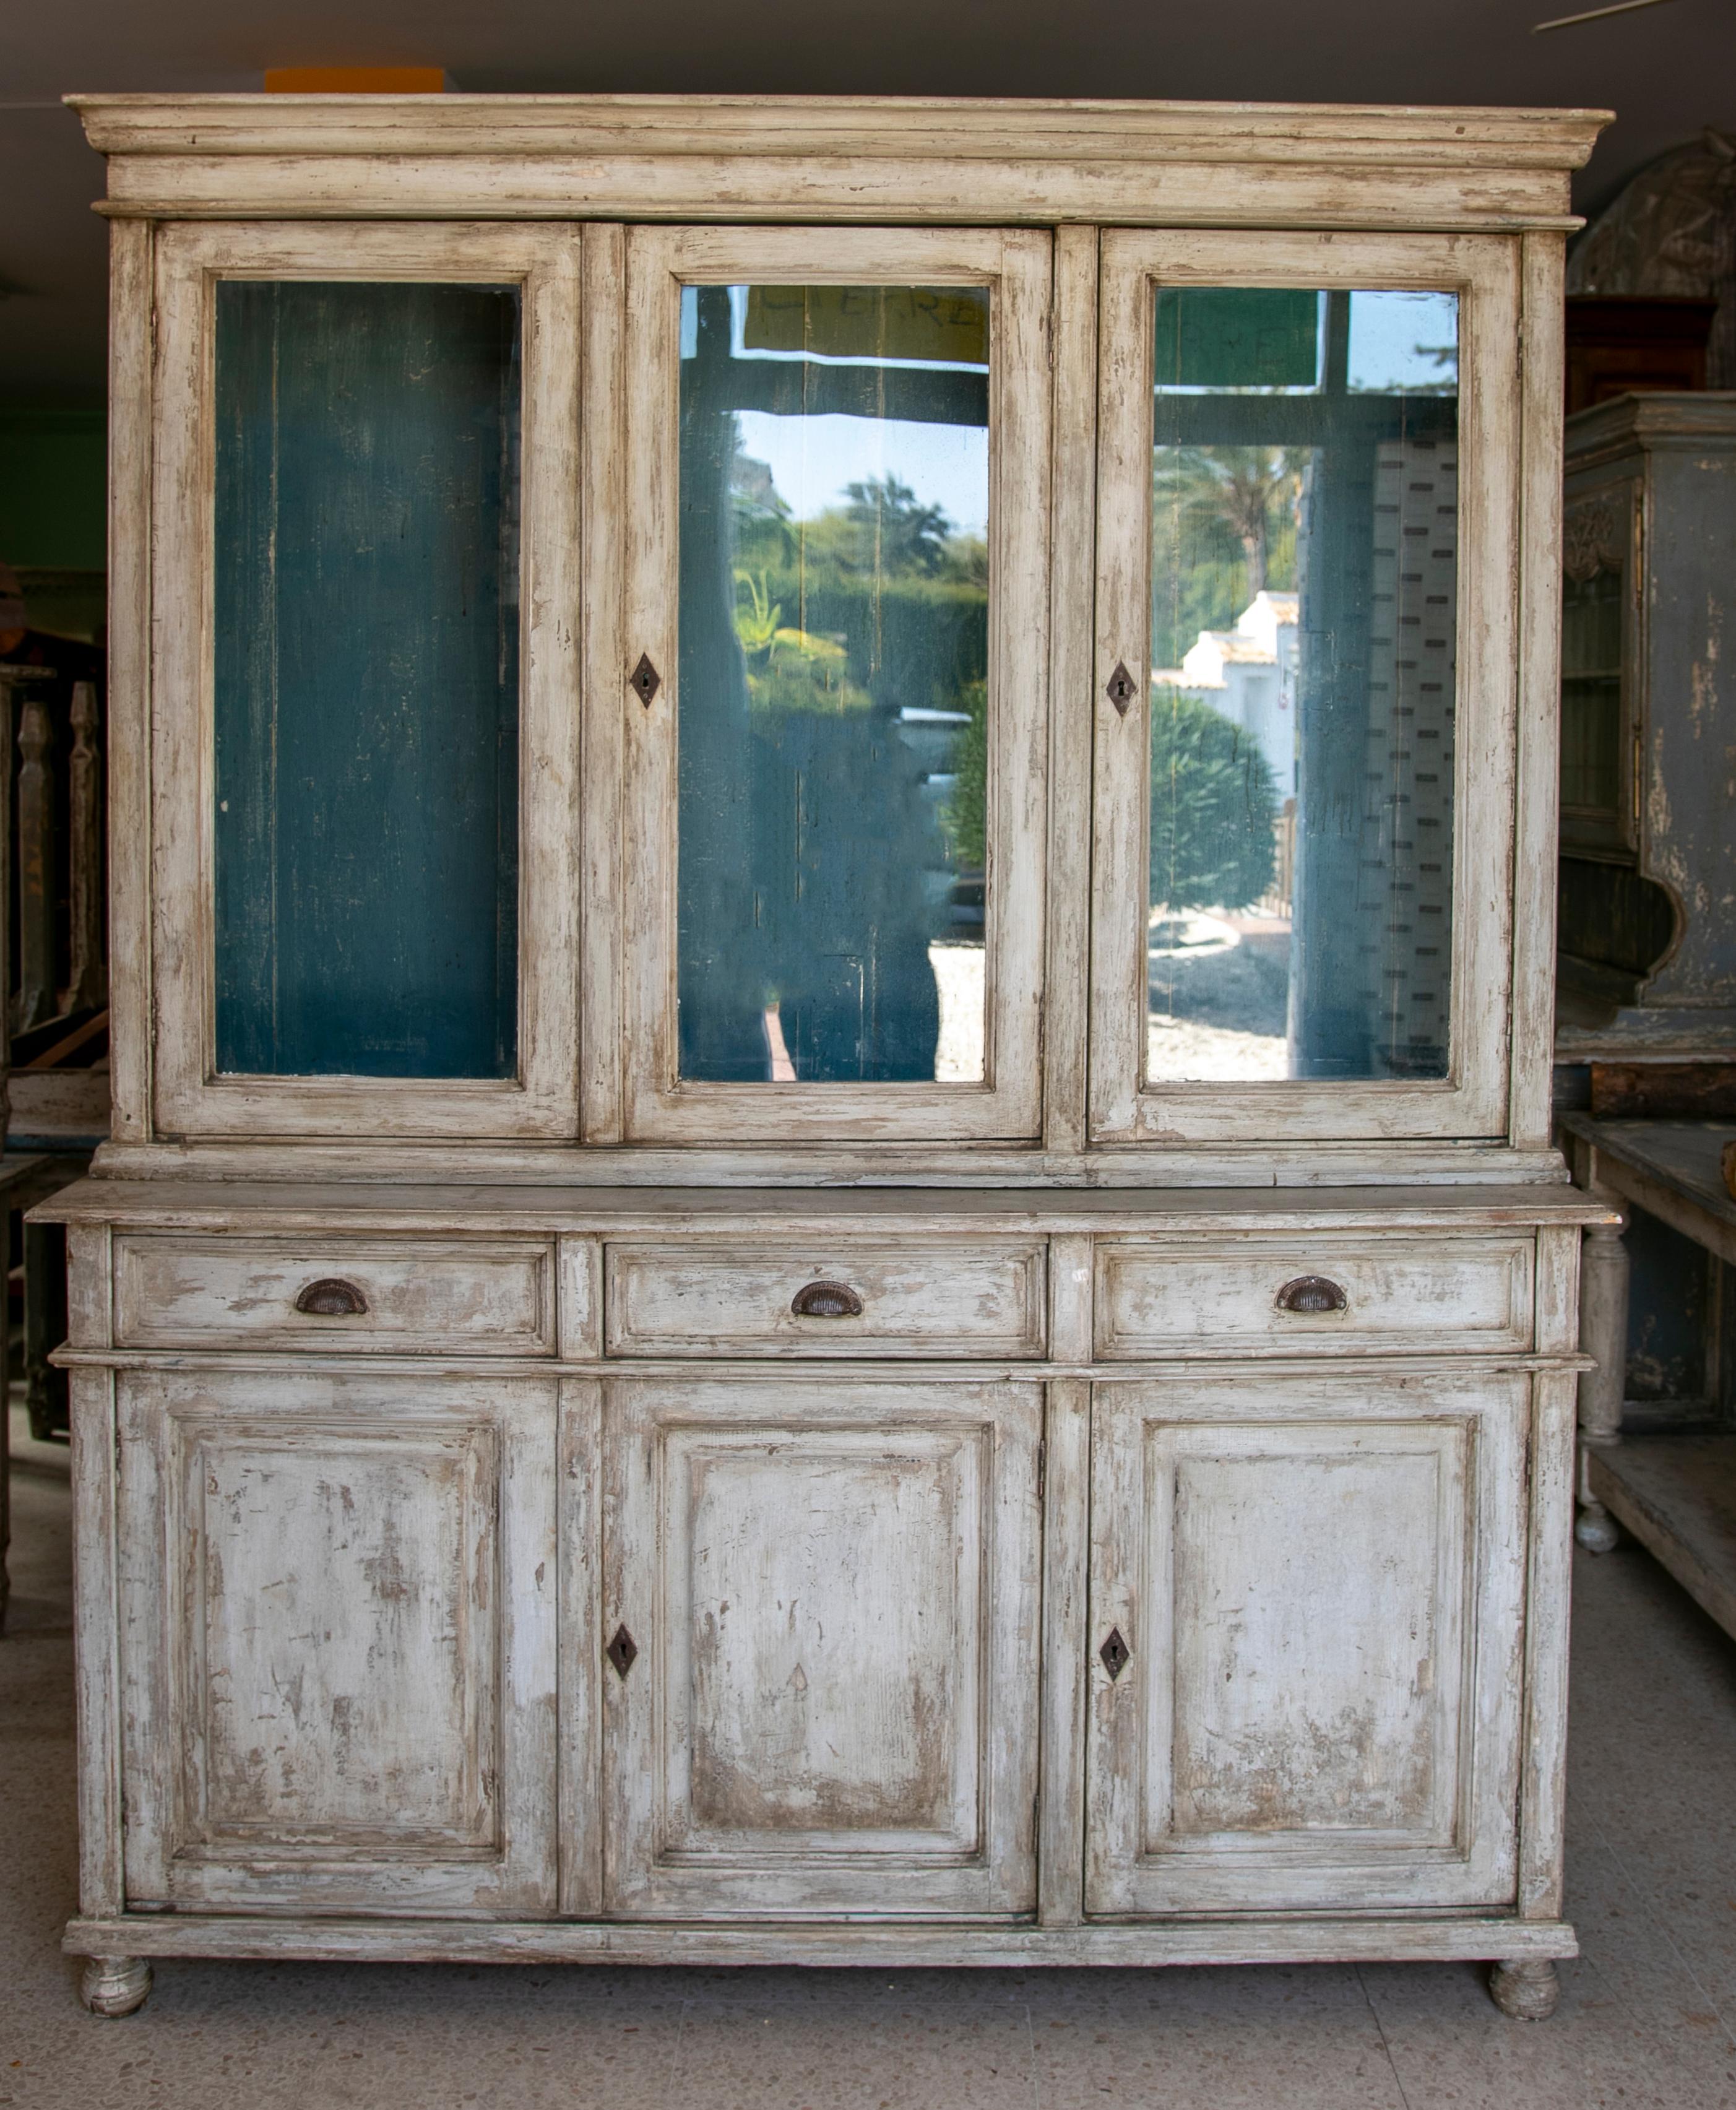 Rustic 1950s Spanish three glass panel door white painted bookcase cabinet with drawers and doors. The paint has worn off giving it a distressed weathered finish.
    